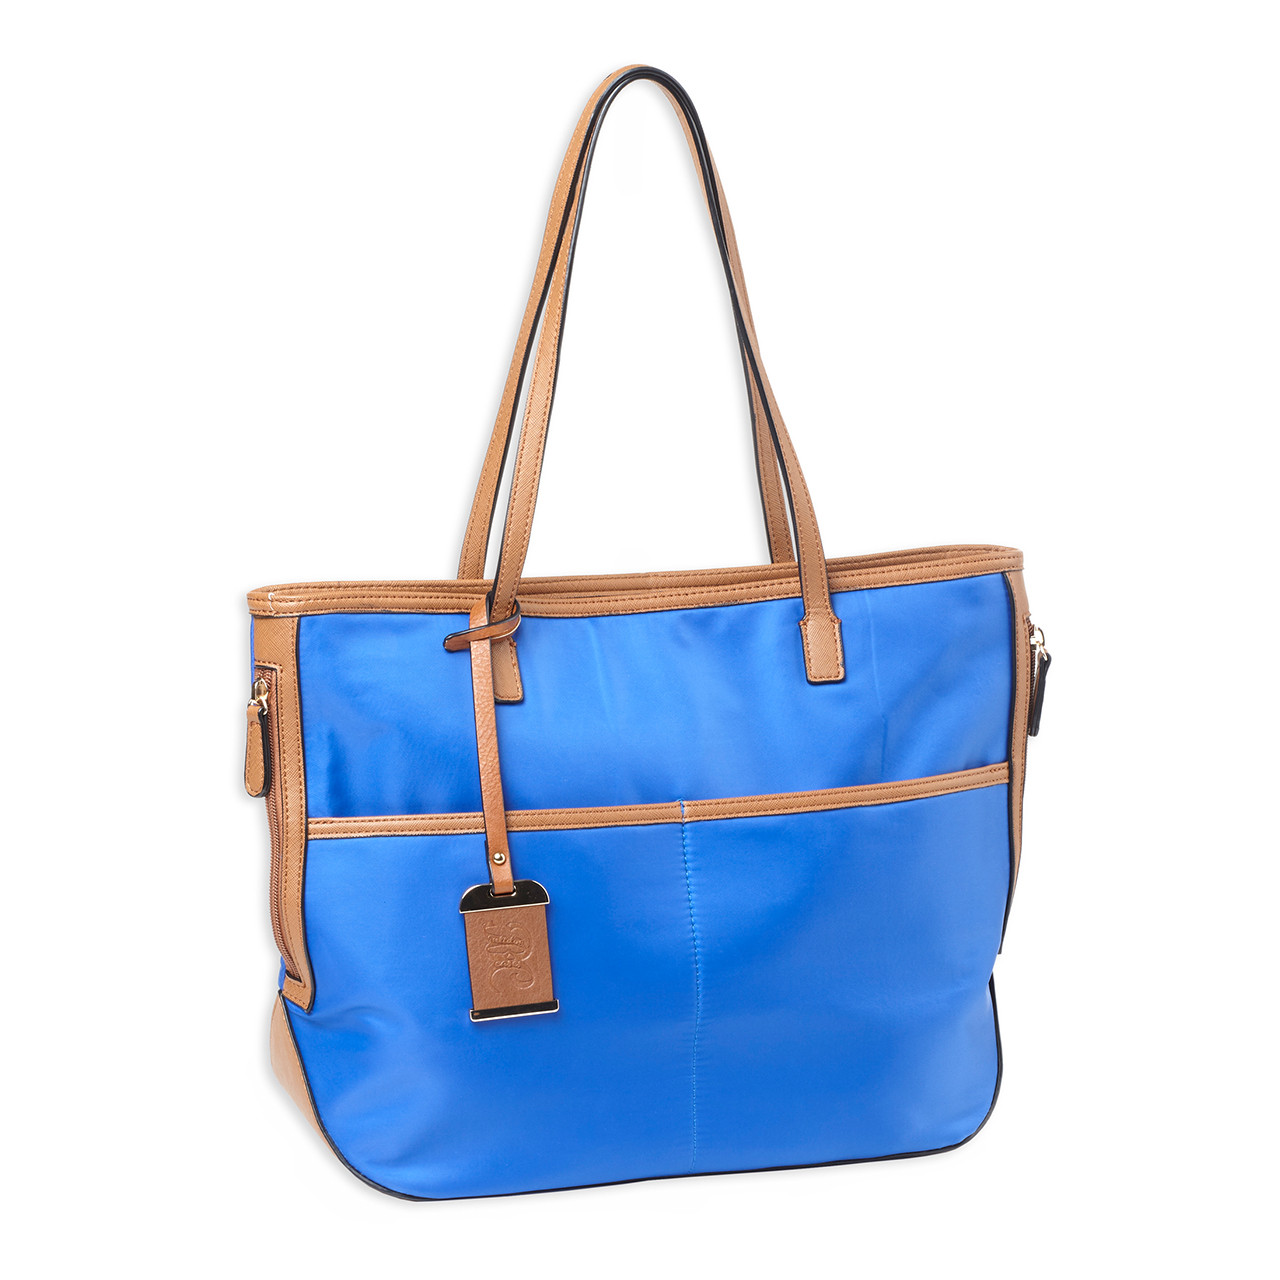 Small Leather Colourful Compartment Purse (5 Colours) – Missy Online:  Shoes, Fashion & Accessories Based in Leeds